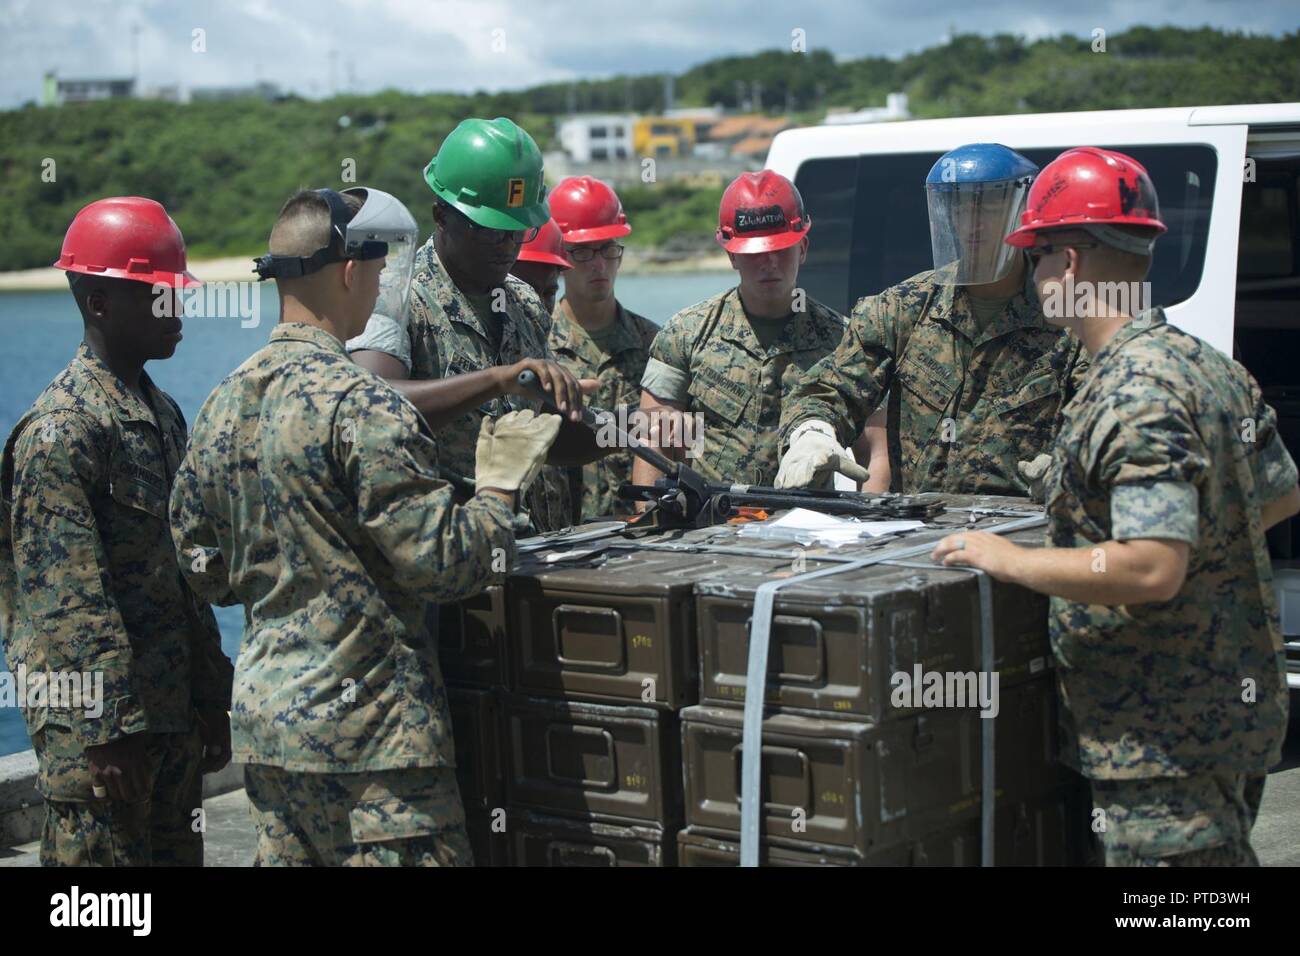 U.S. Marines conduct a movement of unserviceable ammunition, July 11, 2017, from the Ammunition Supply Point on Camp Schwab, Okinawa, Japan to a United States Naval Ship at Tengan Pier, Okinawa, Japan. The Marines with Ammunition Company, 3d Supply Battalion, Combat Logistics Regiment 35, 3d Marine Logistics Group, III Marine Expeditionary Force loaded up approximately 130 pallets of ammunition at the ASP to be transported and returned to the Naval Munitions Command on Sasebo Navy Base, Japan, for proper disposal. The experience of a ship-to-shore ammo movement is unique to the Marines with II Stock Photo